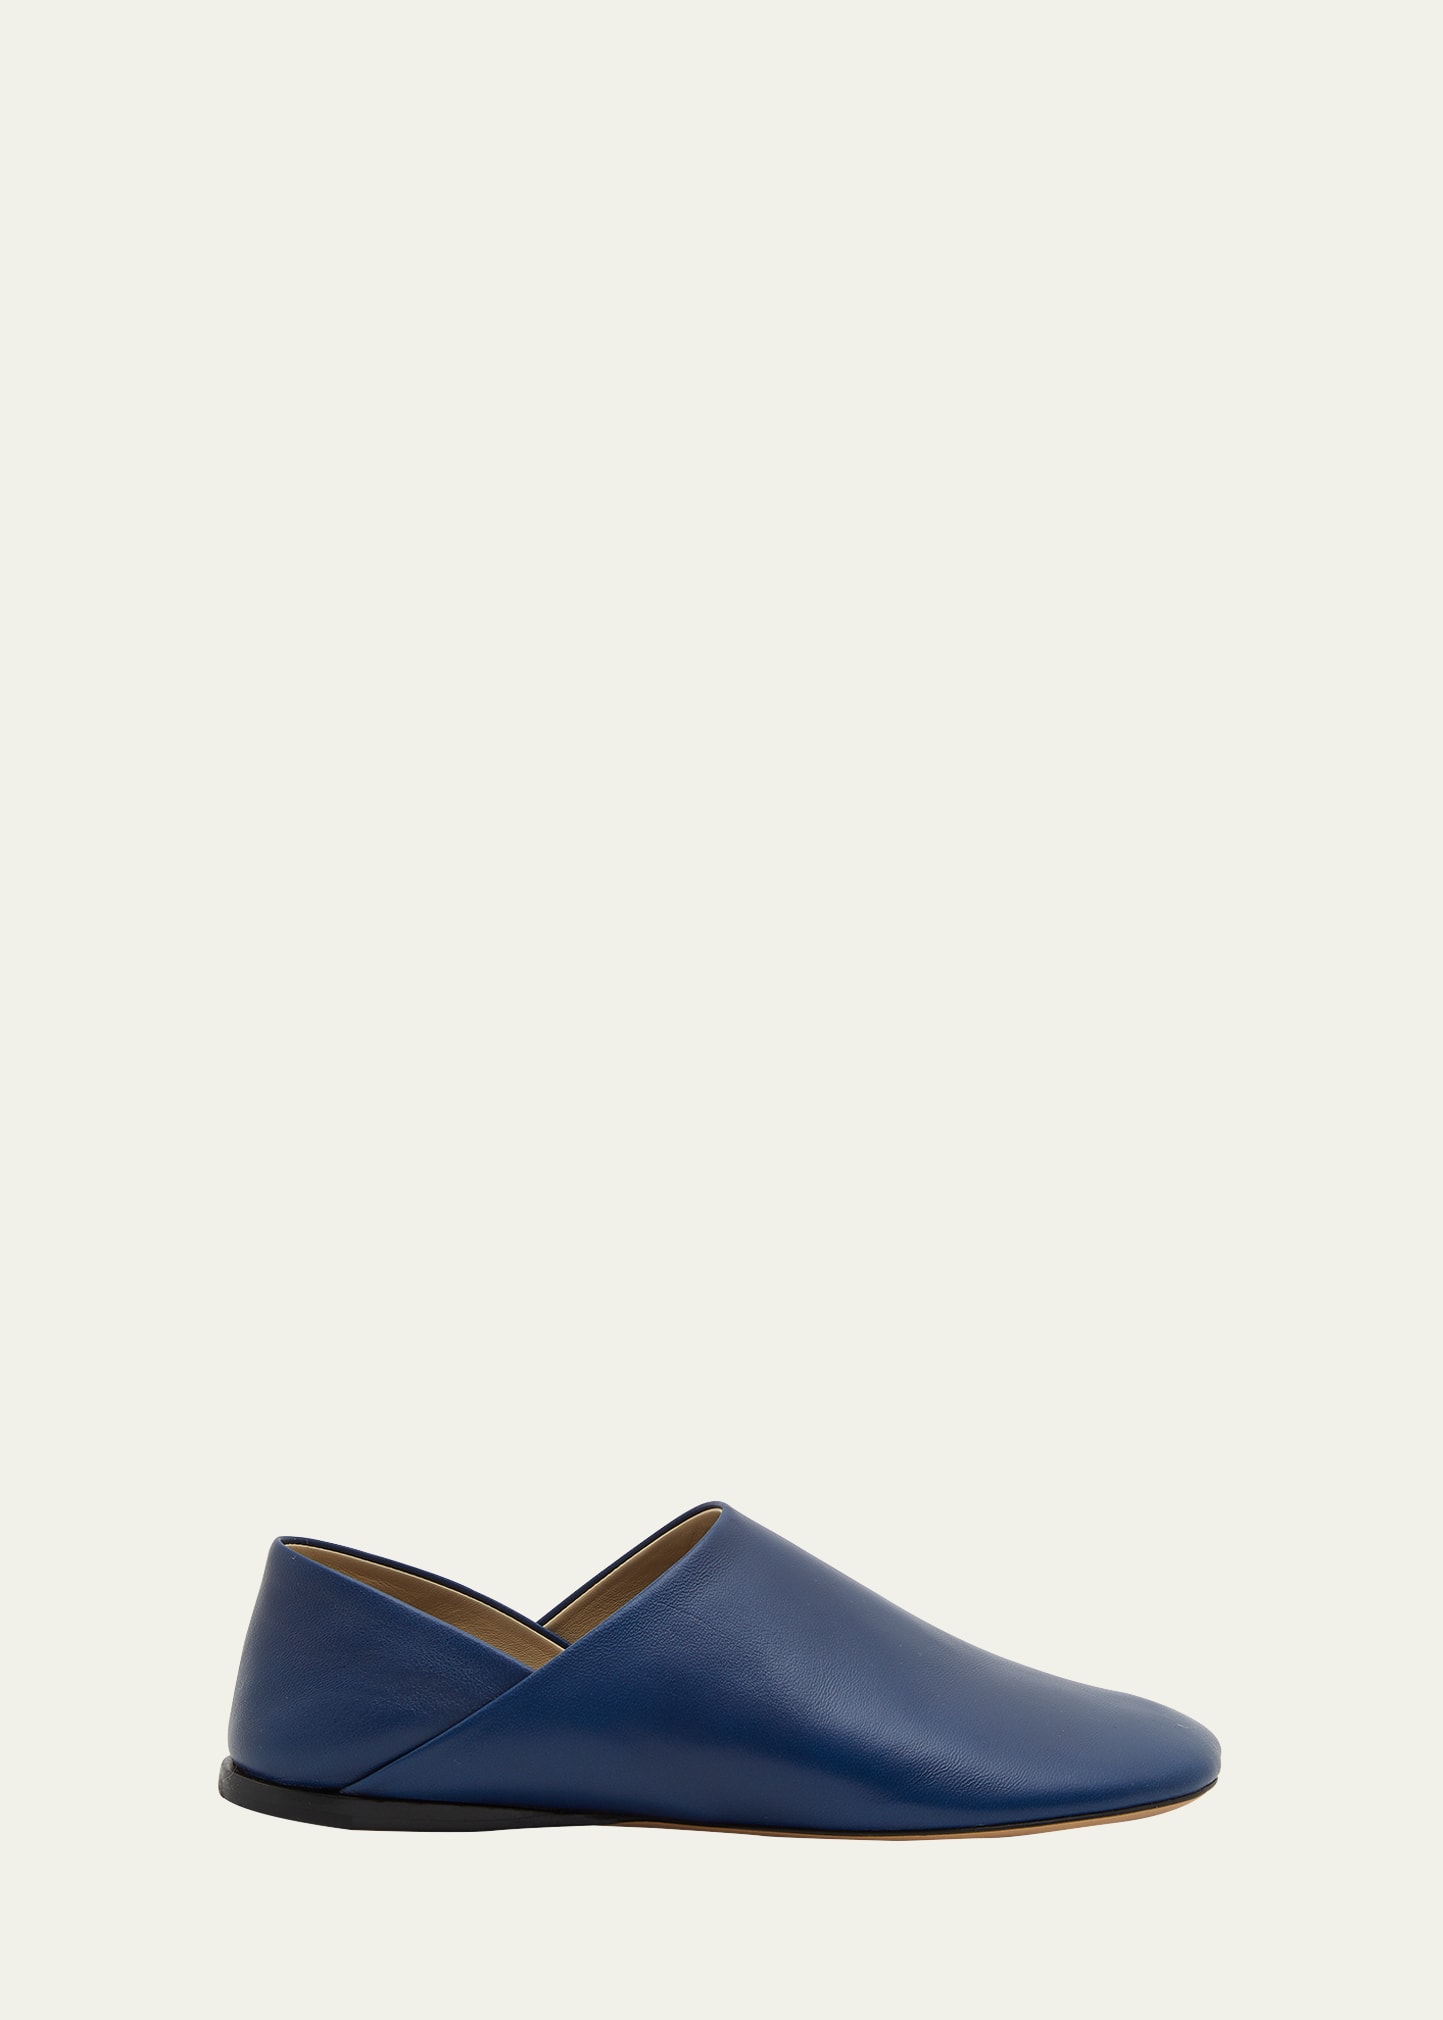 LOEWE TOY LEATHER SLIPPER LOAFERS